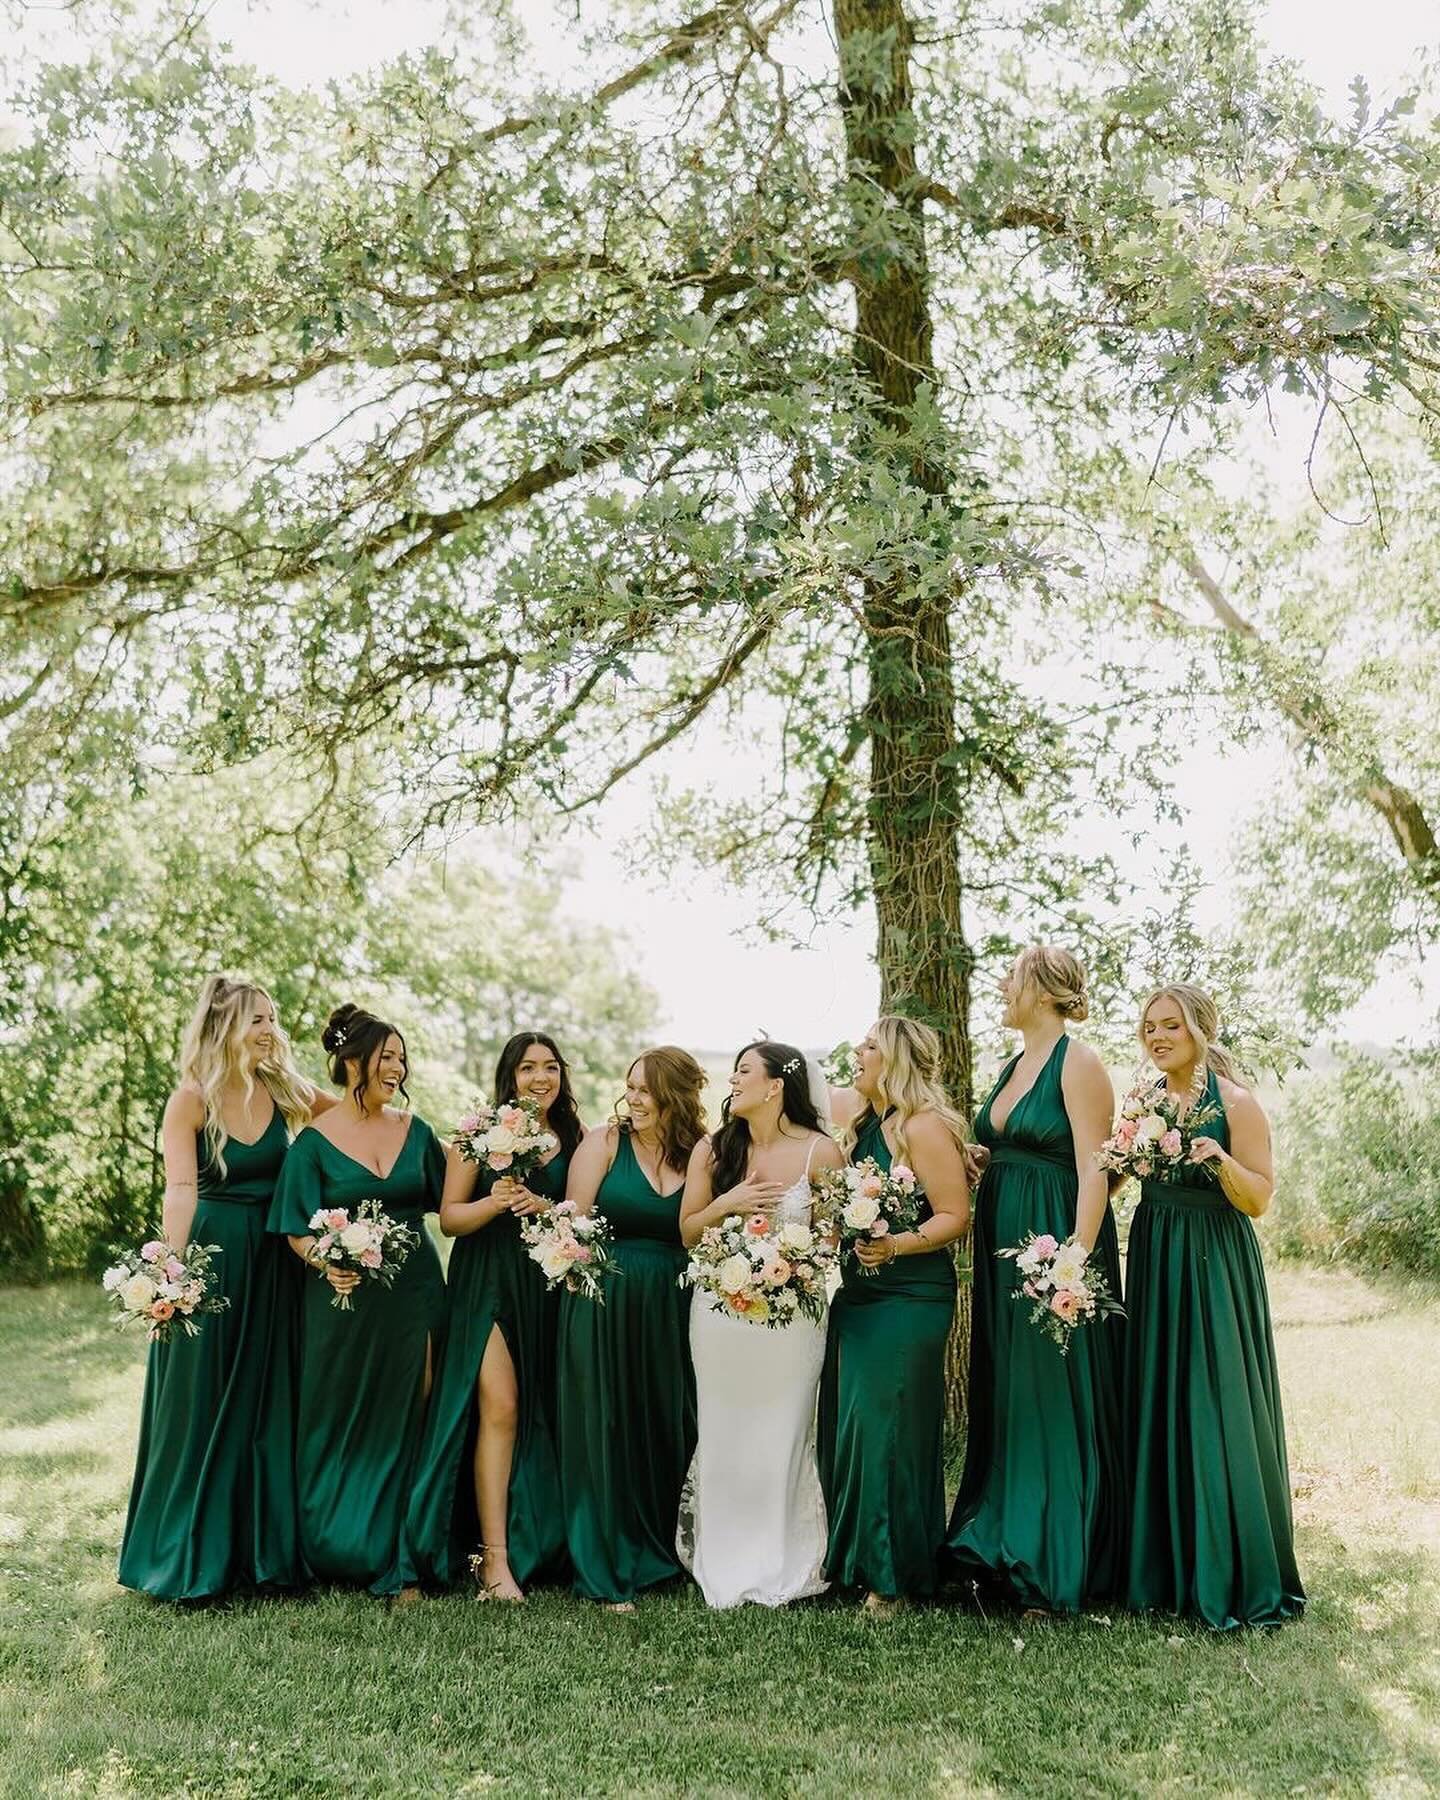 Every successful bride has her trusted circle of bridesmaids right by her side.☺️
We love seeing the joy and support these wonderful women bring to the big day. They do more than hold bouquets; they hold the day together with love and laughter. Cheer